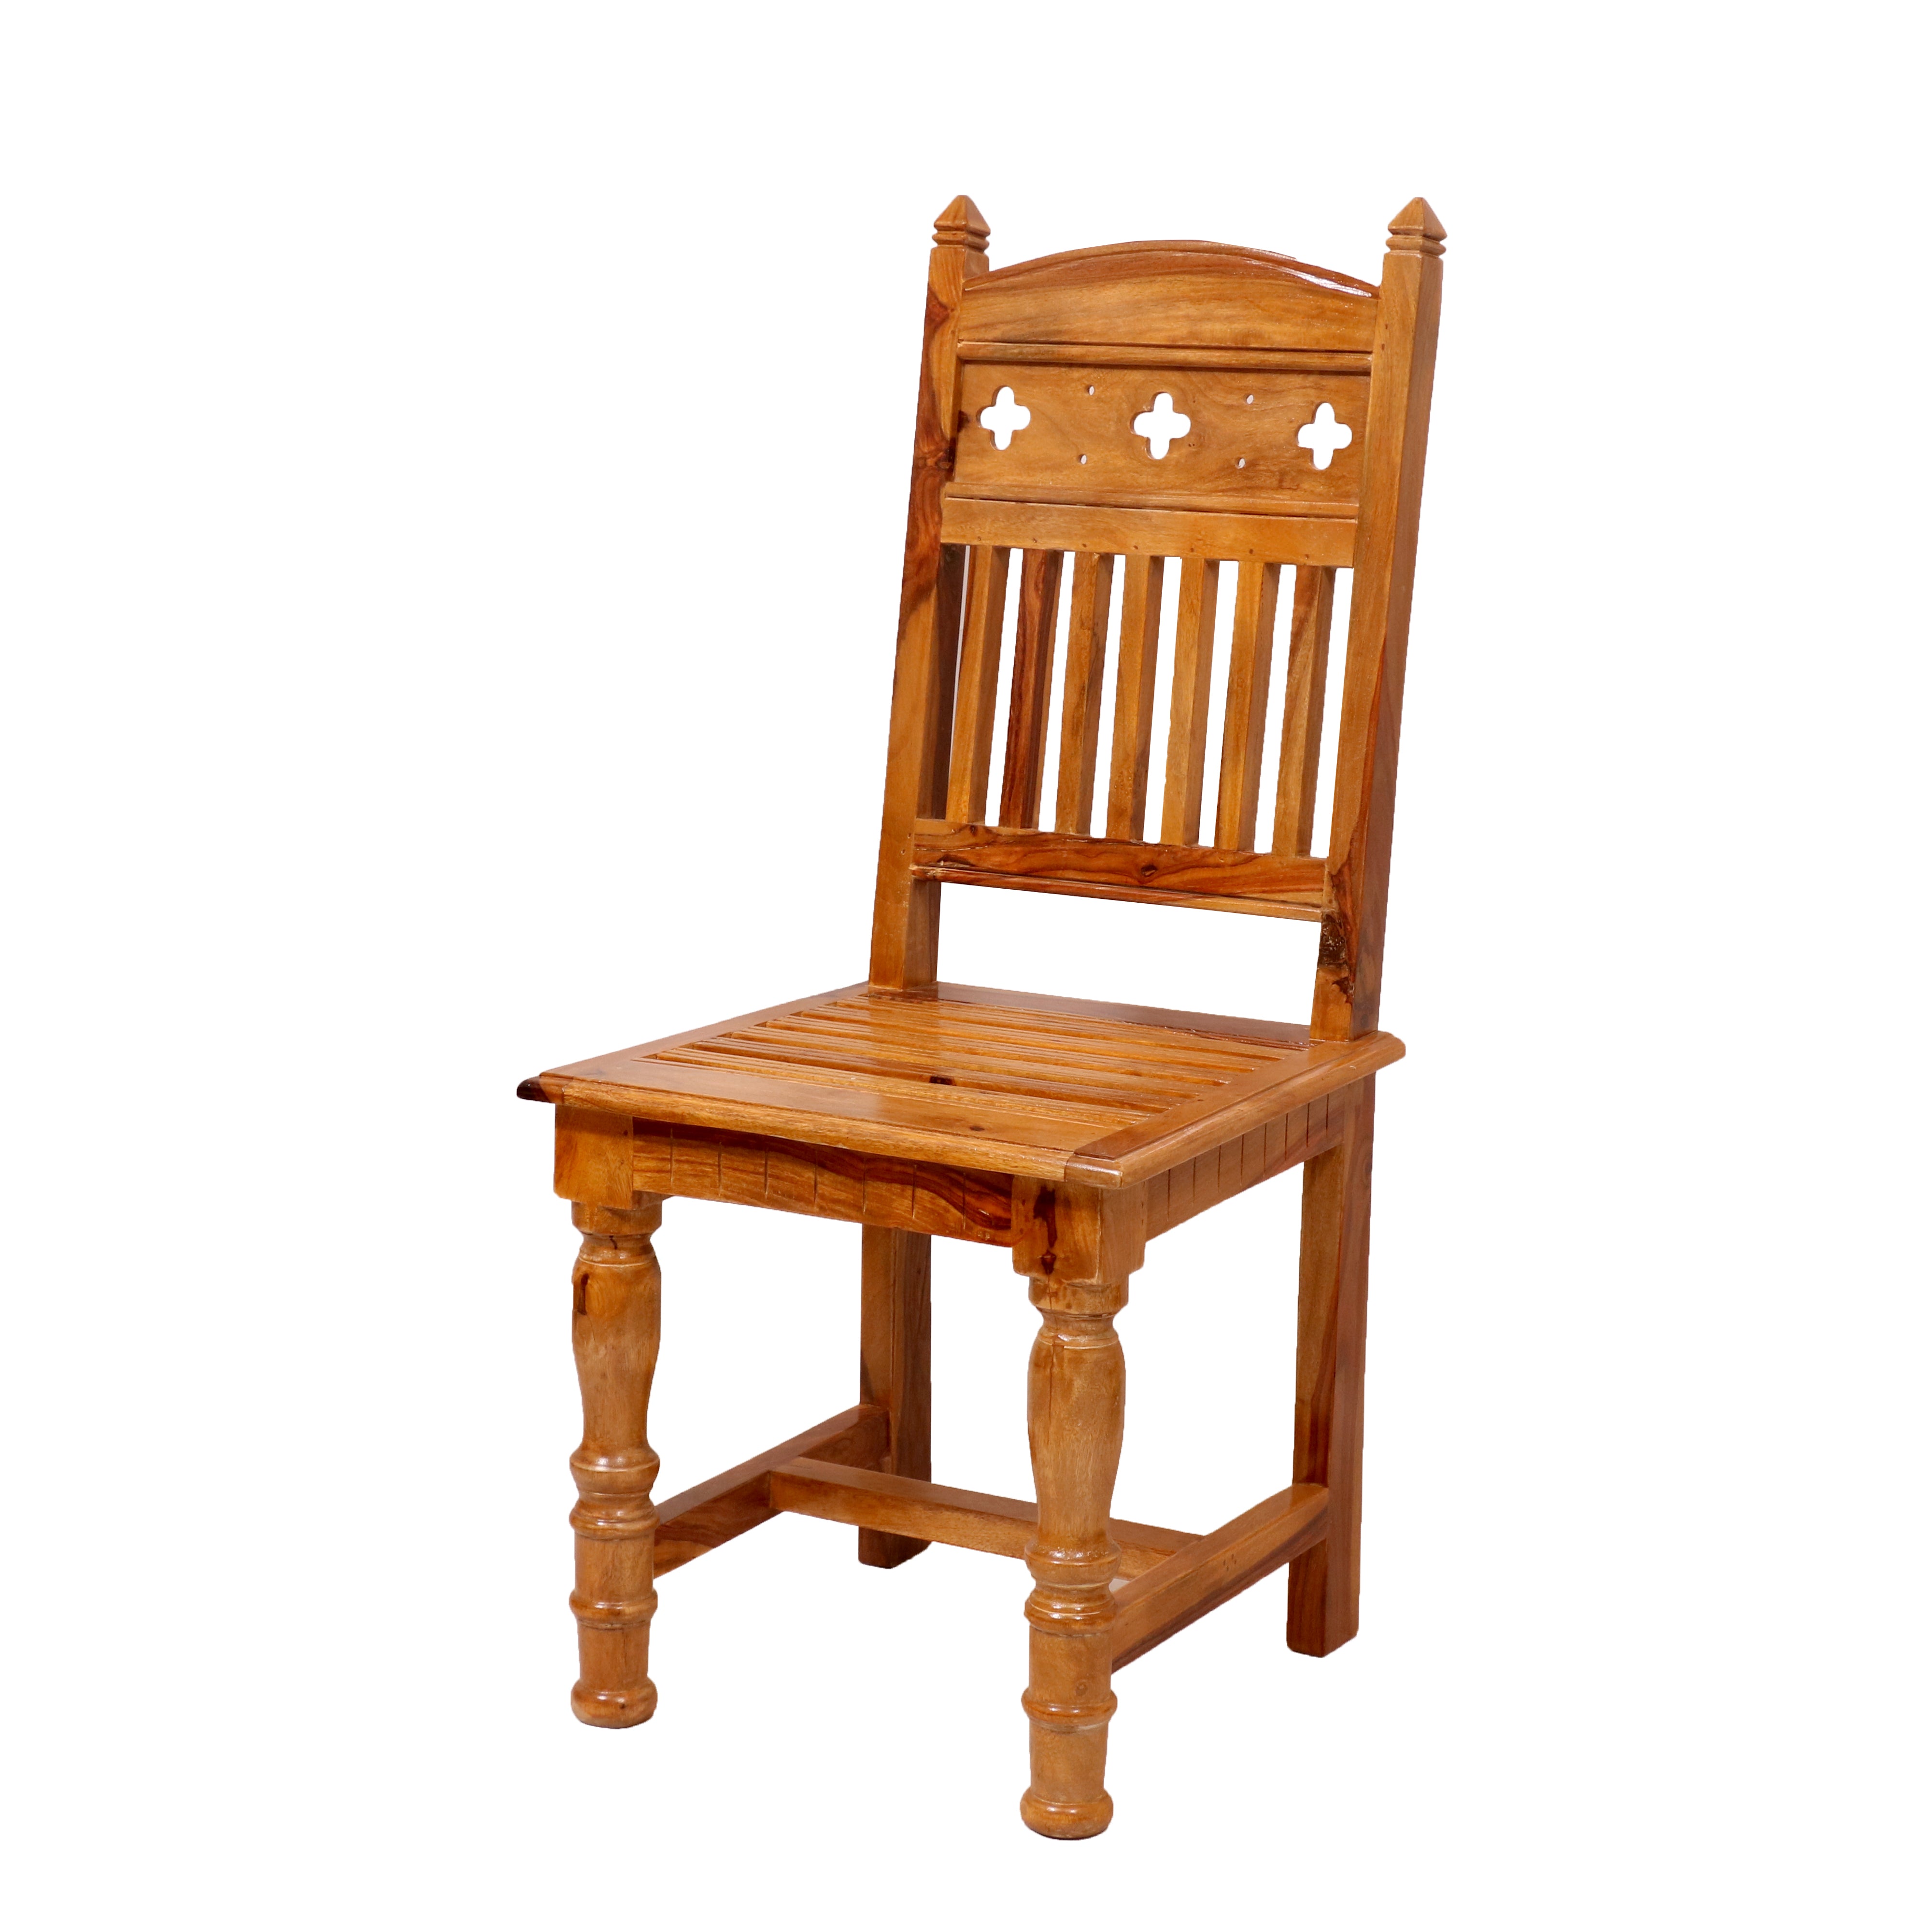 (Set of 2) Cut Out Carved Chair Dining Chair